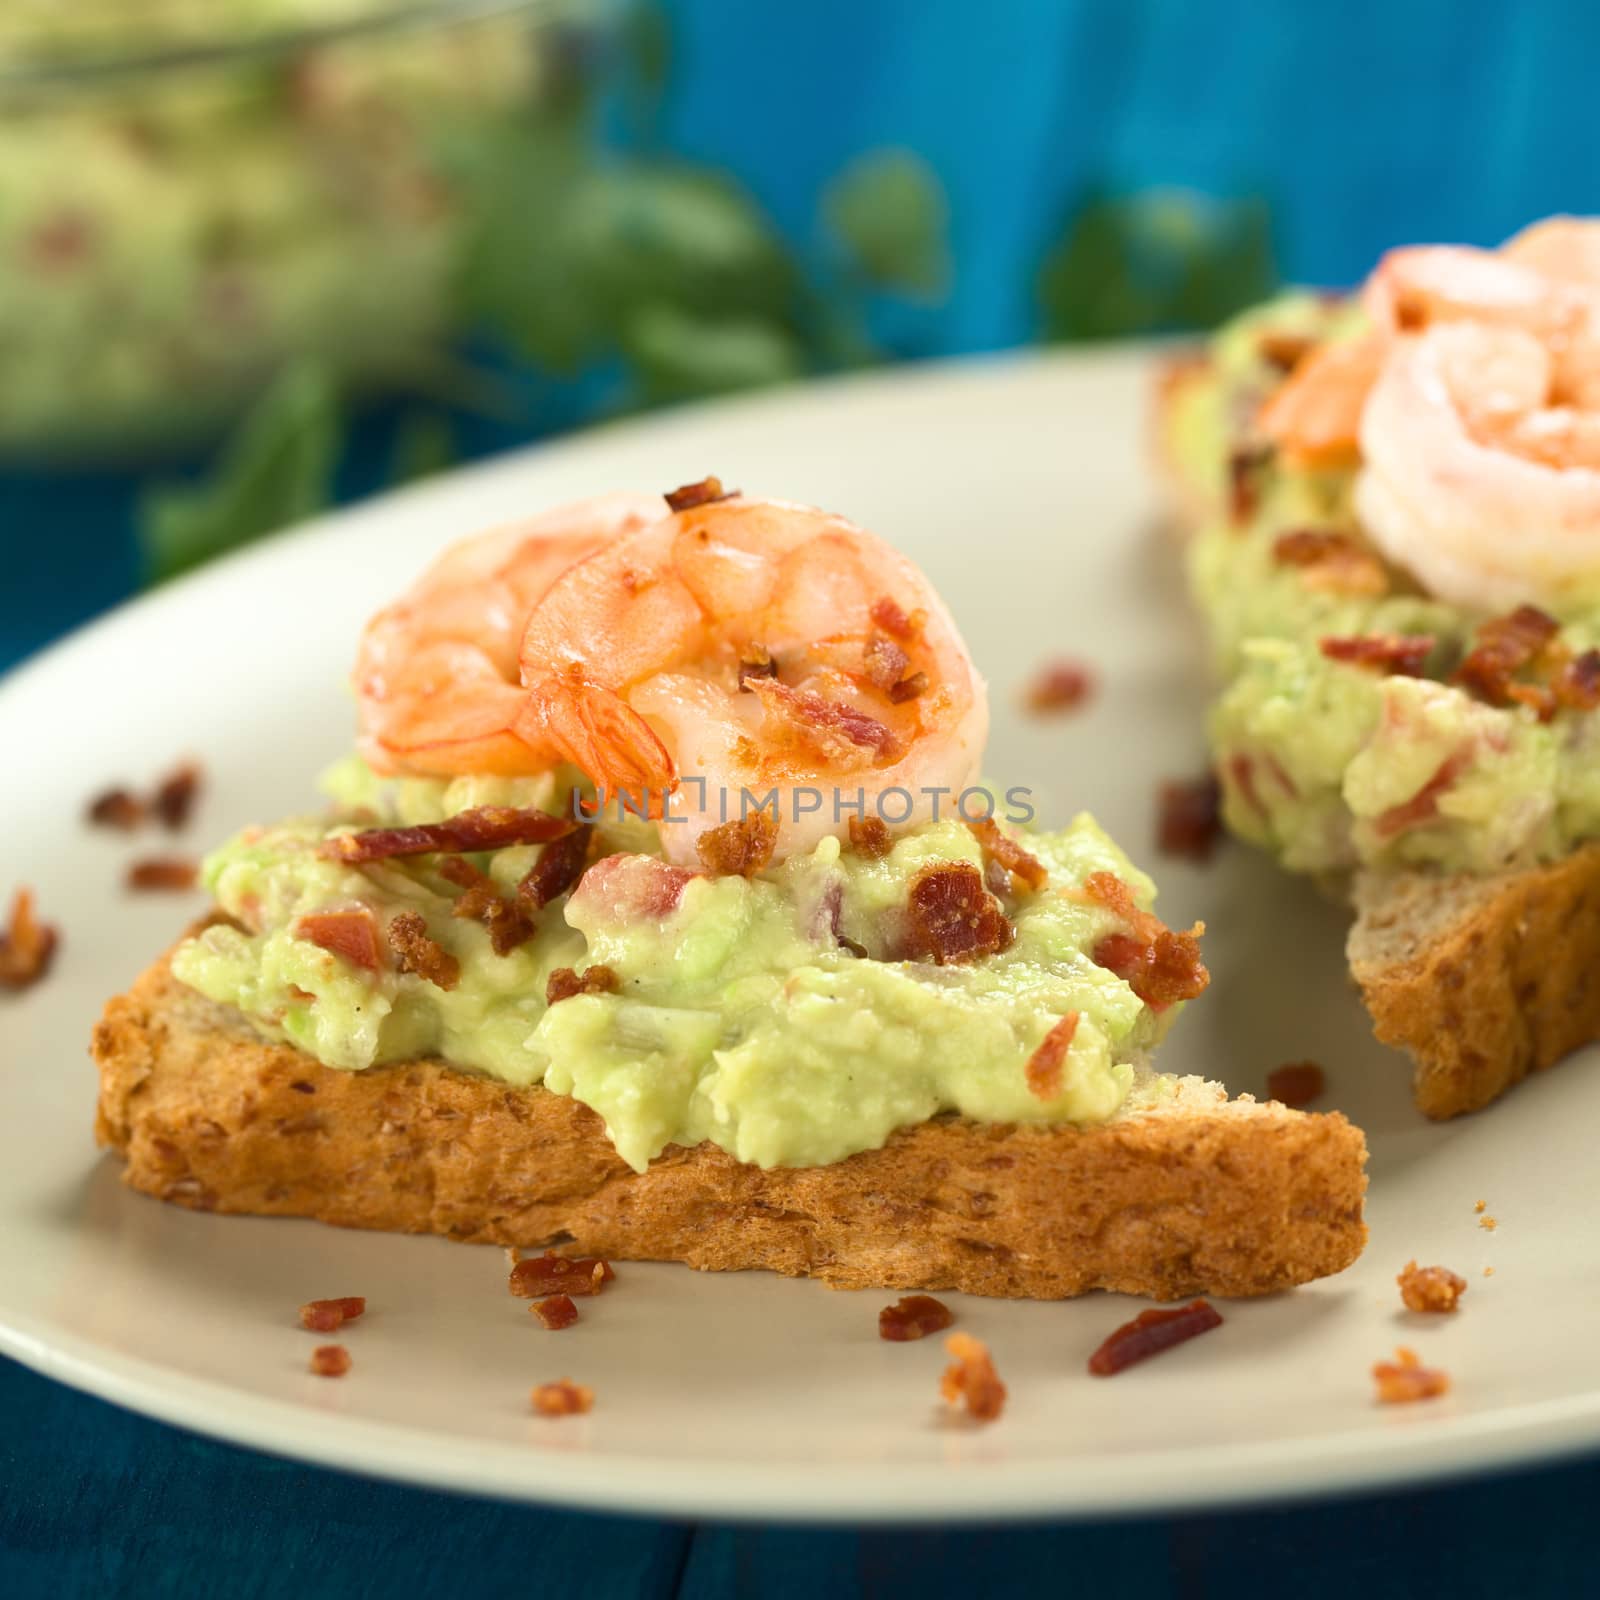 Wholegrain toast bread slices with guacamole, fried shrimp and fried bacon pieces (Selective Focus, Focus on the front of the shrimp on the bread) 